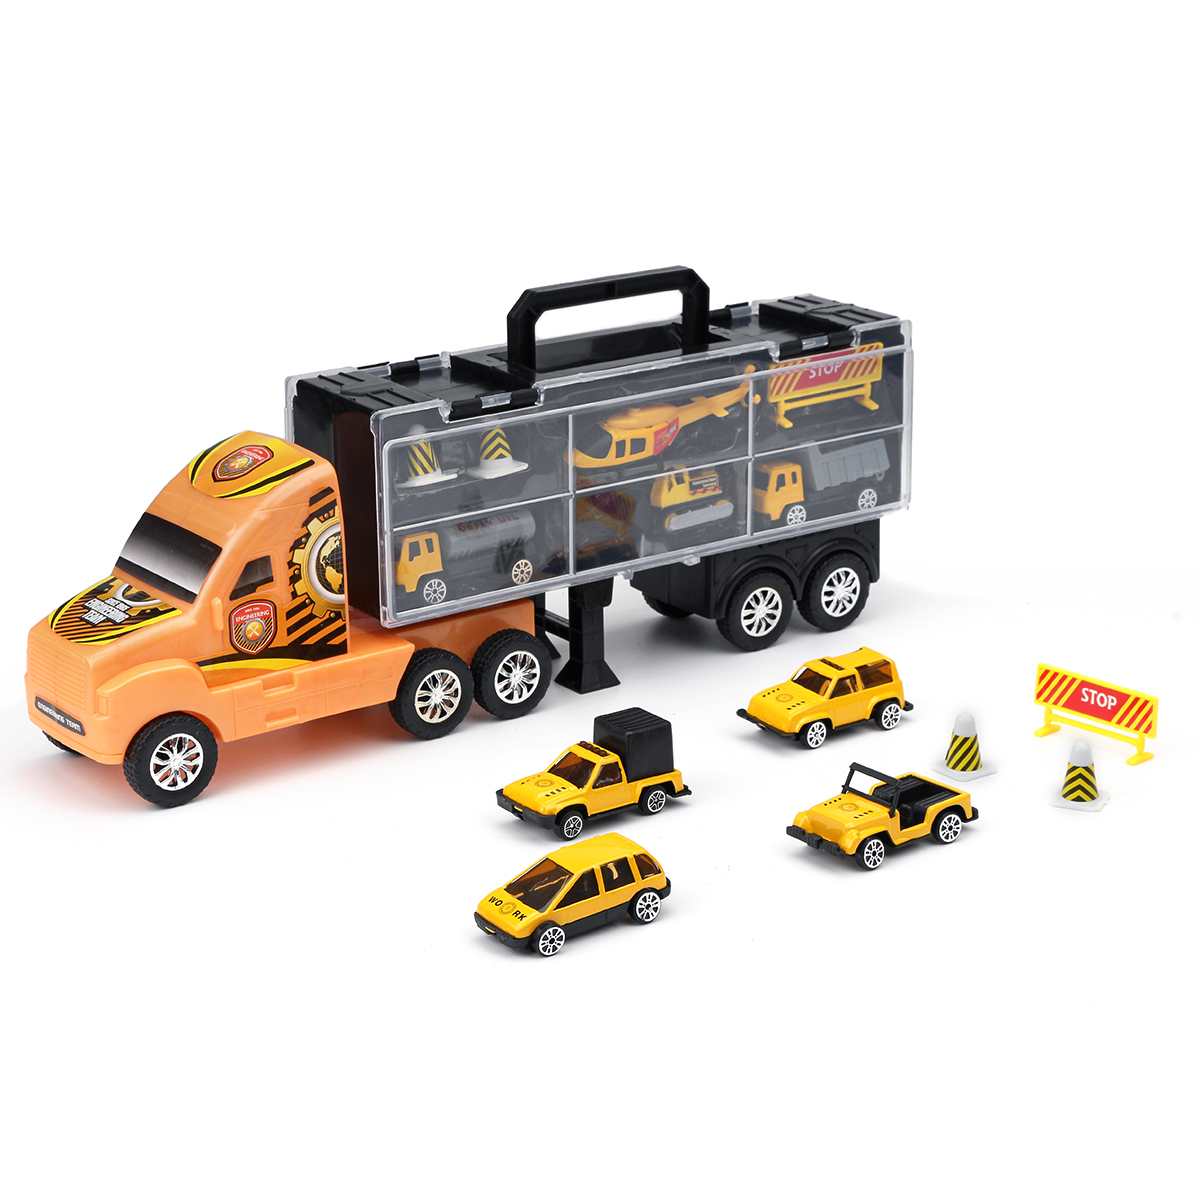 Alloy-Trailer-Container-Car-Storage-Box-Diecast-Car-Model-Set-Toy-for-Childrens-Gift-1635959-4